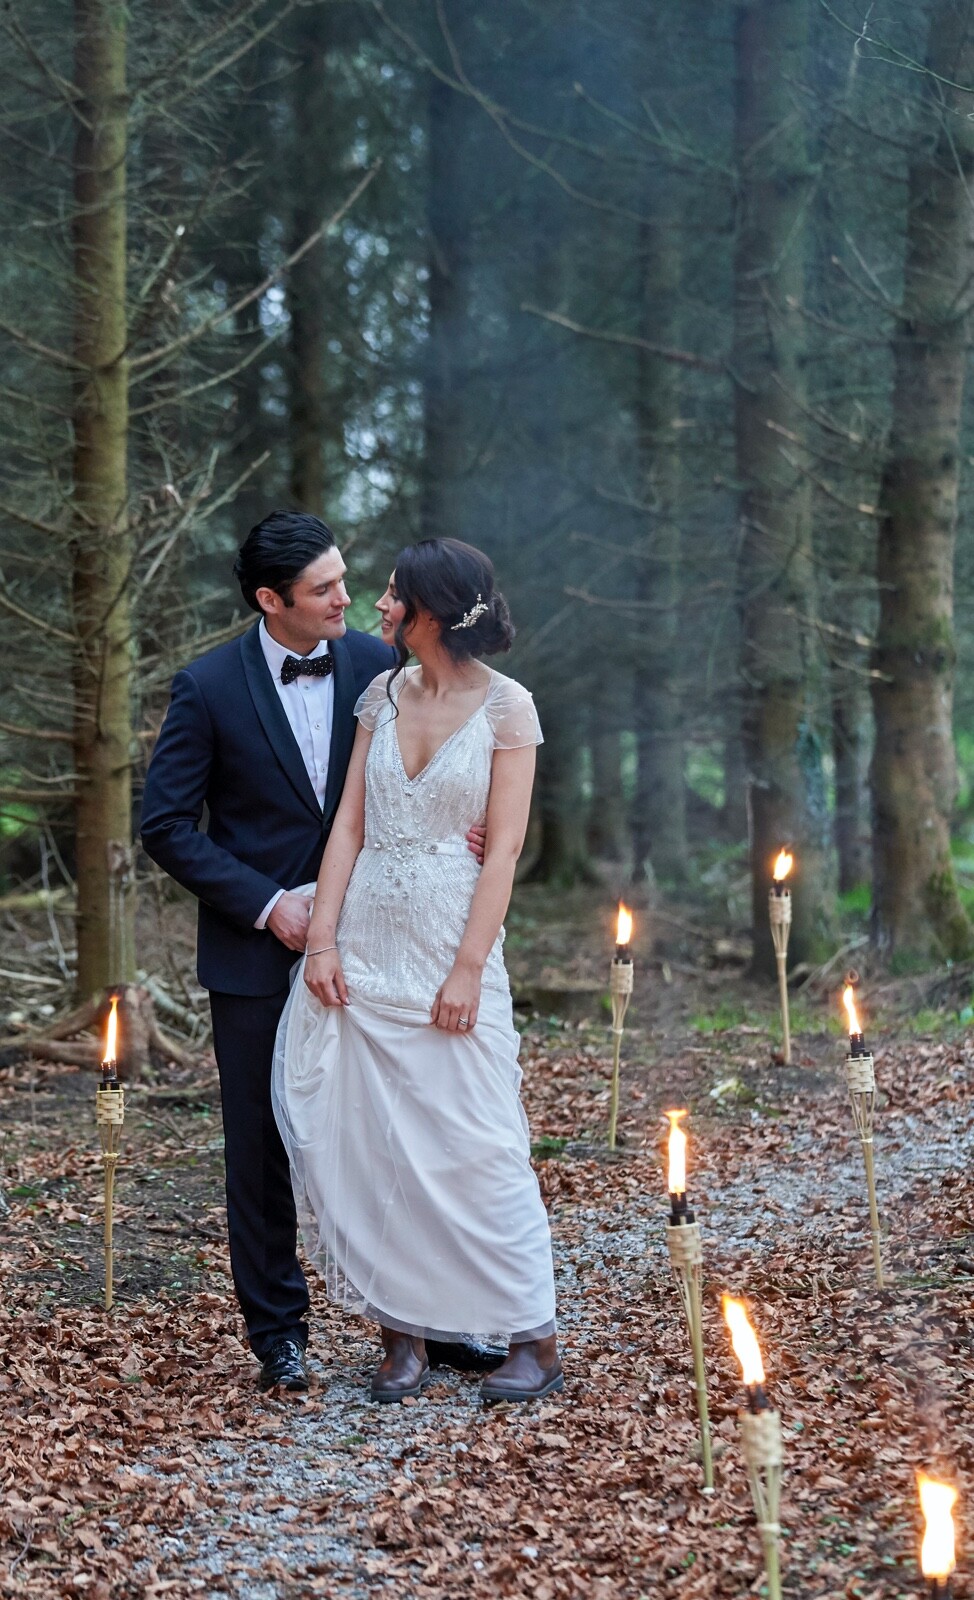 A stolen moment - the fairy forest on our Estate is a lovely spot for magical wedding photography